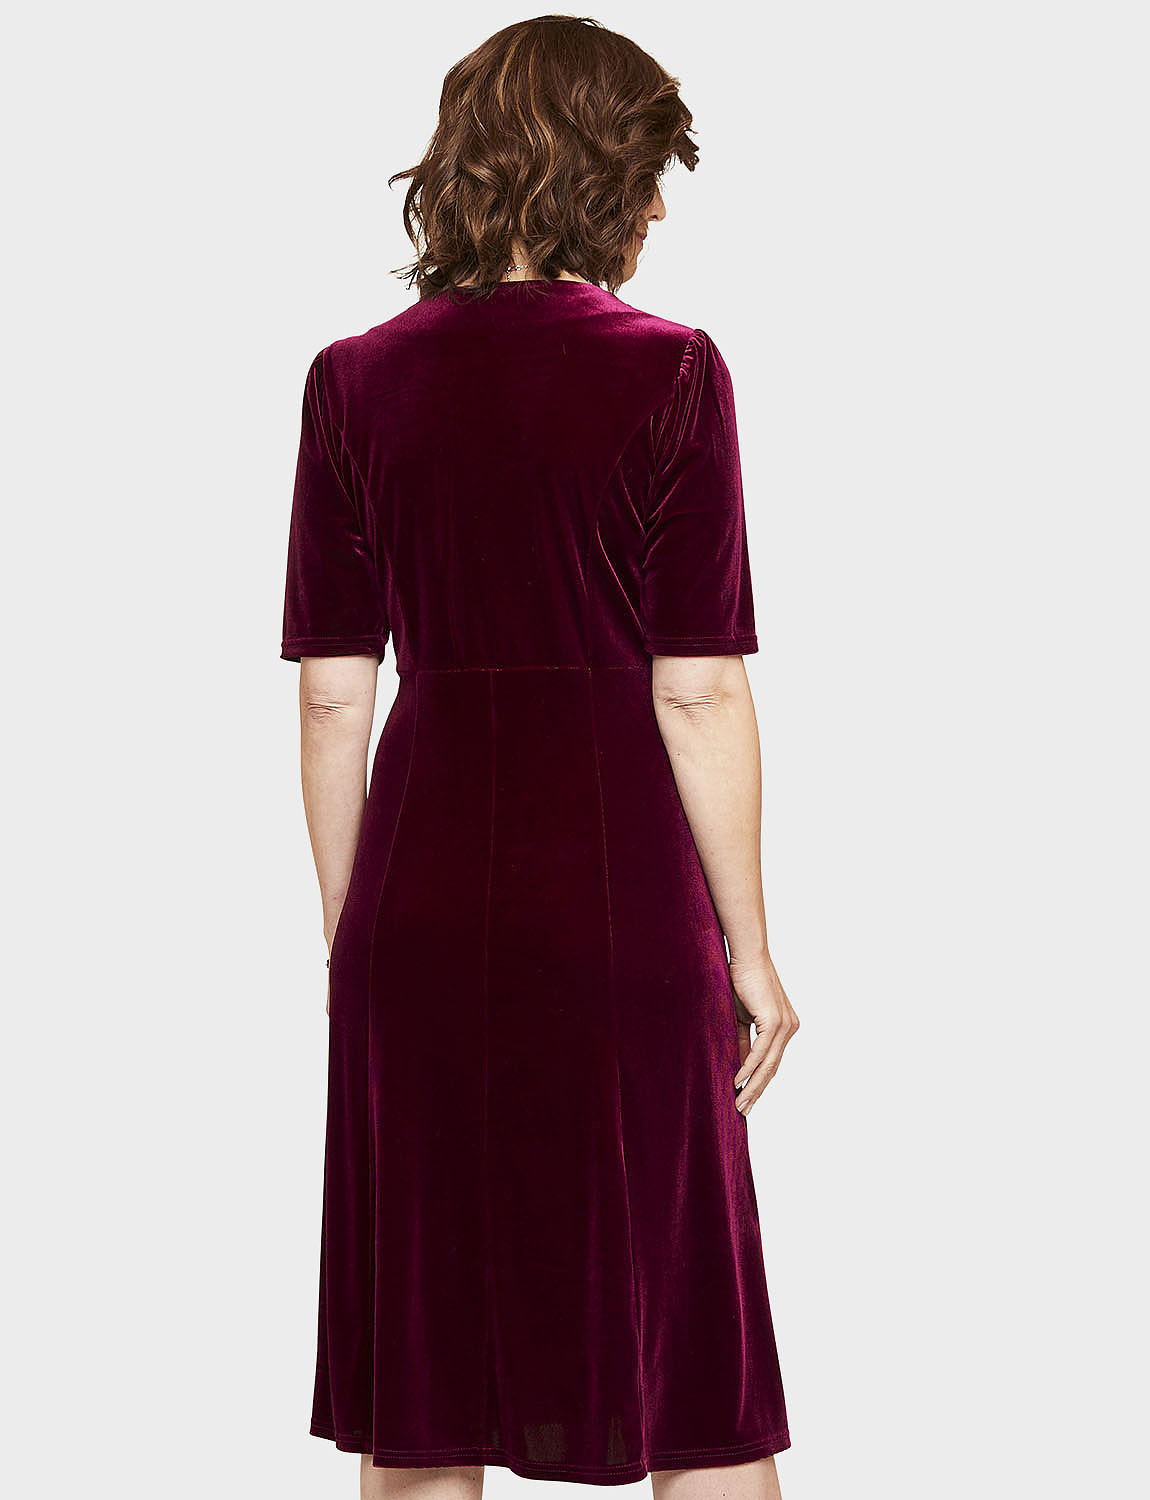 Velour Dress With Diamante Buttons | Chums